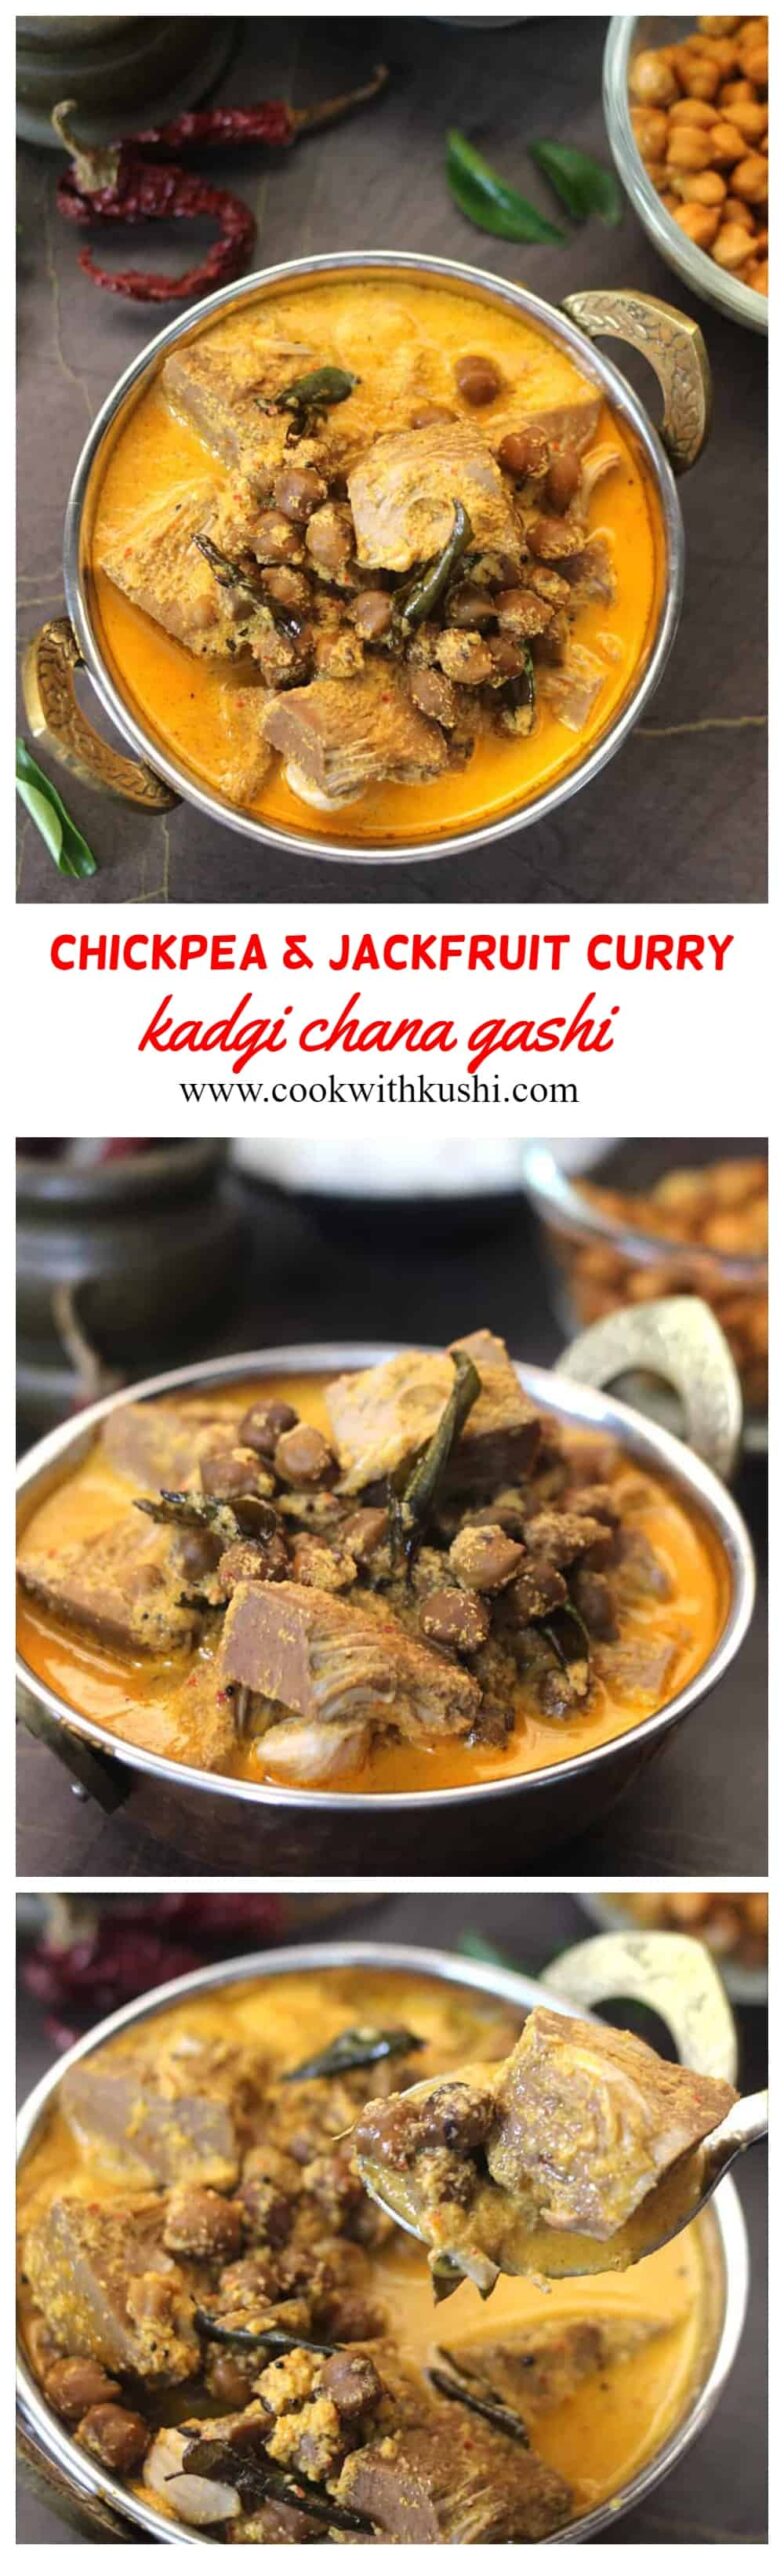 How to make Indian style chickpea and jackfruit curry #chickpeacurry #jackfruit #kathal